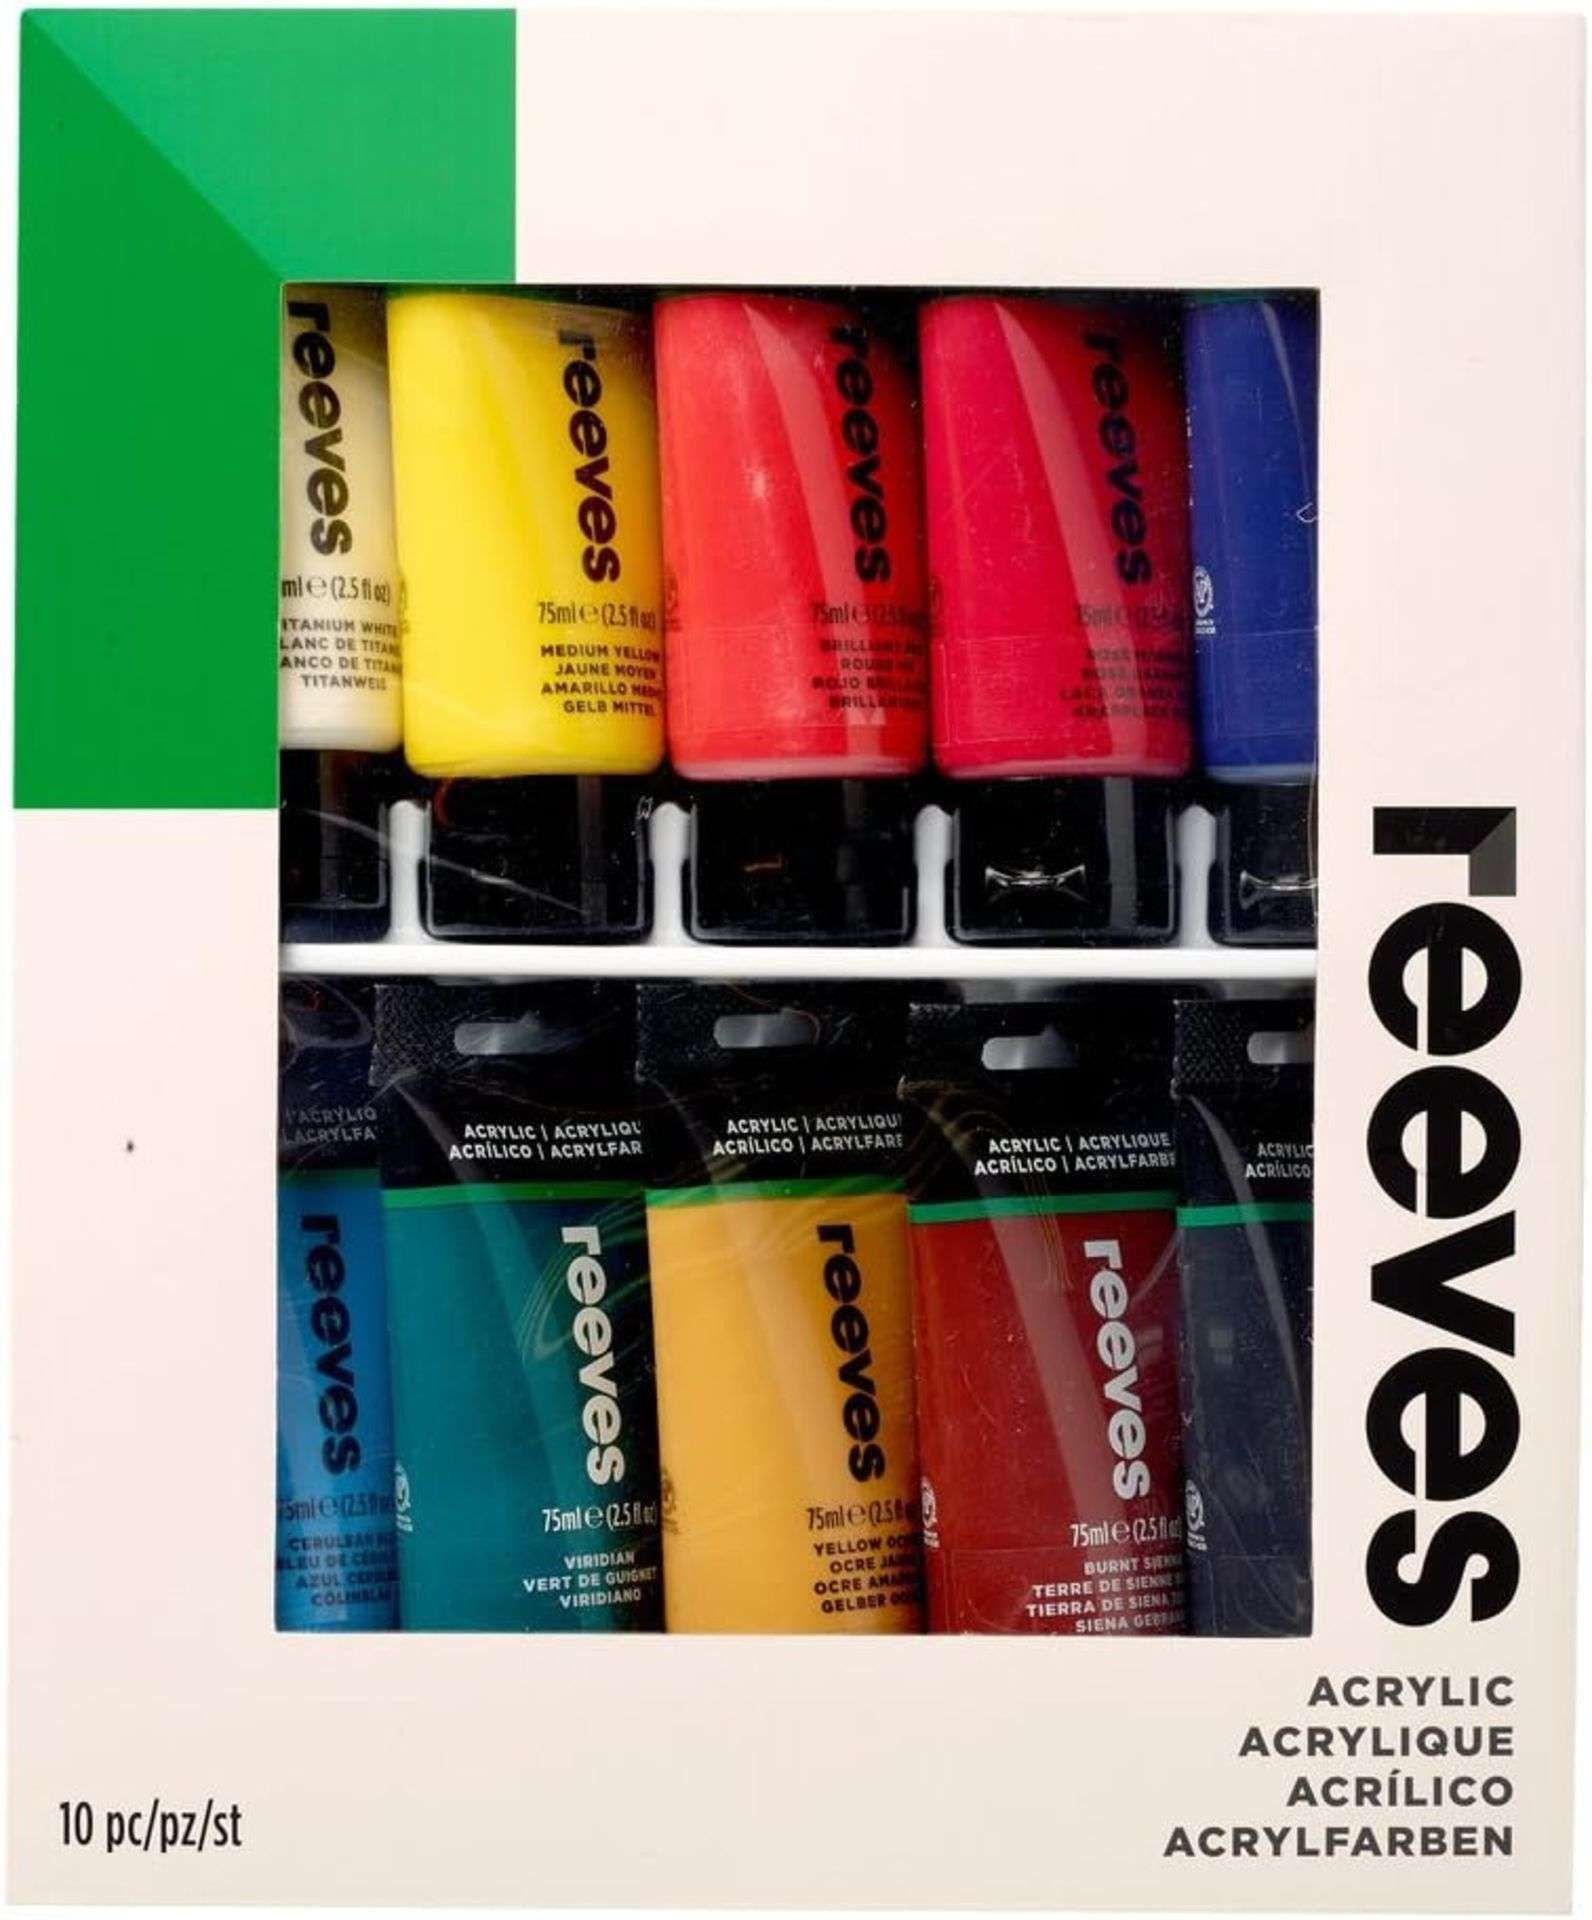 6x BRAND NEW REEVES Highly Pigmented Water Based Acrylic Paint Set 10x 75ml Pack. RRP £23.99 EACH.